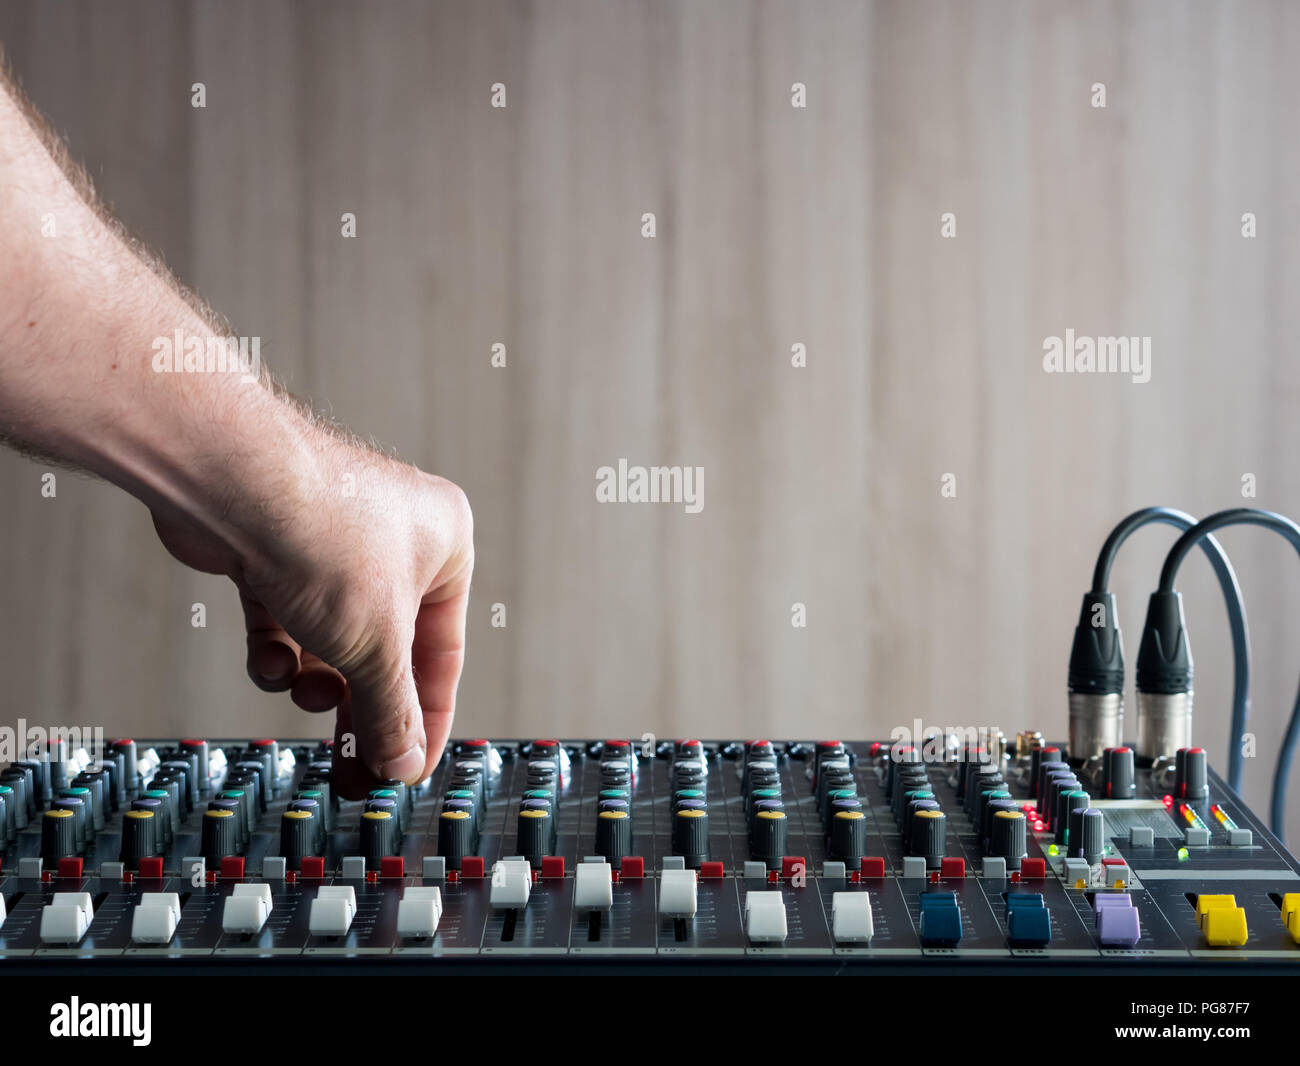 Mans hand adjusting buttons on audio mixer in music studio Stock Photo